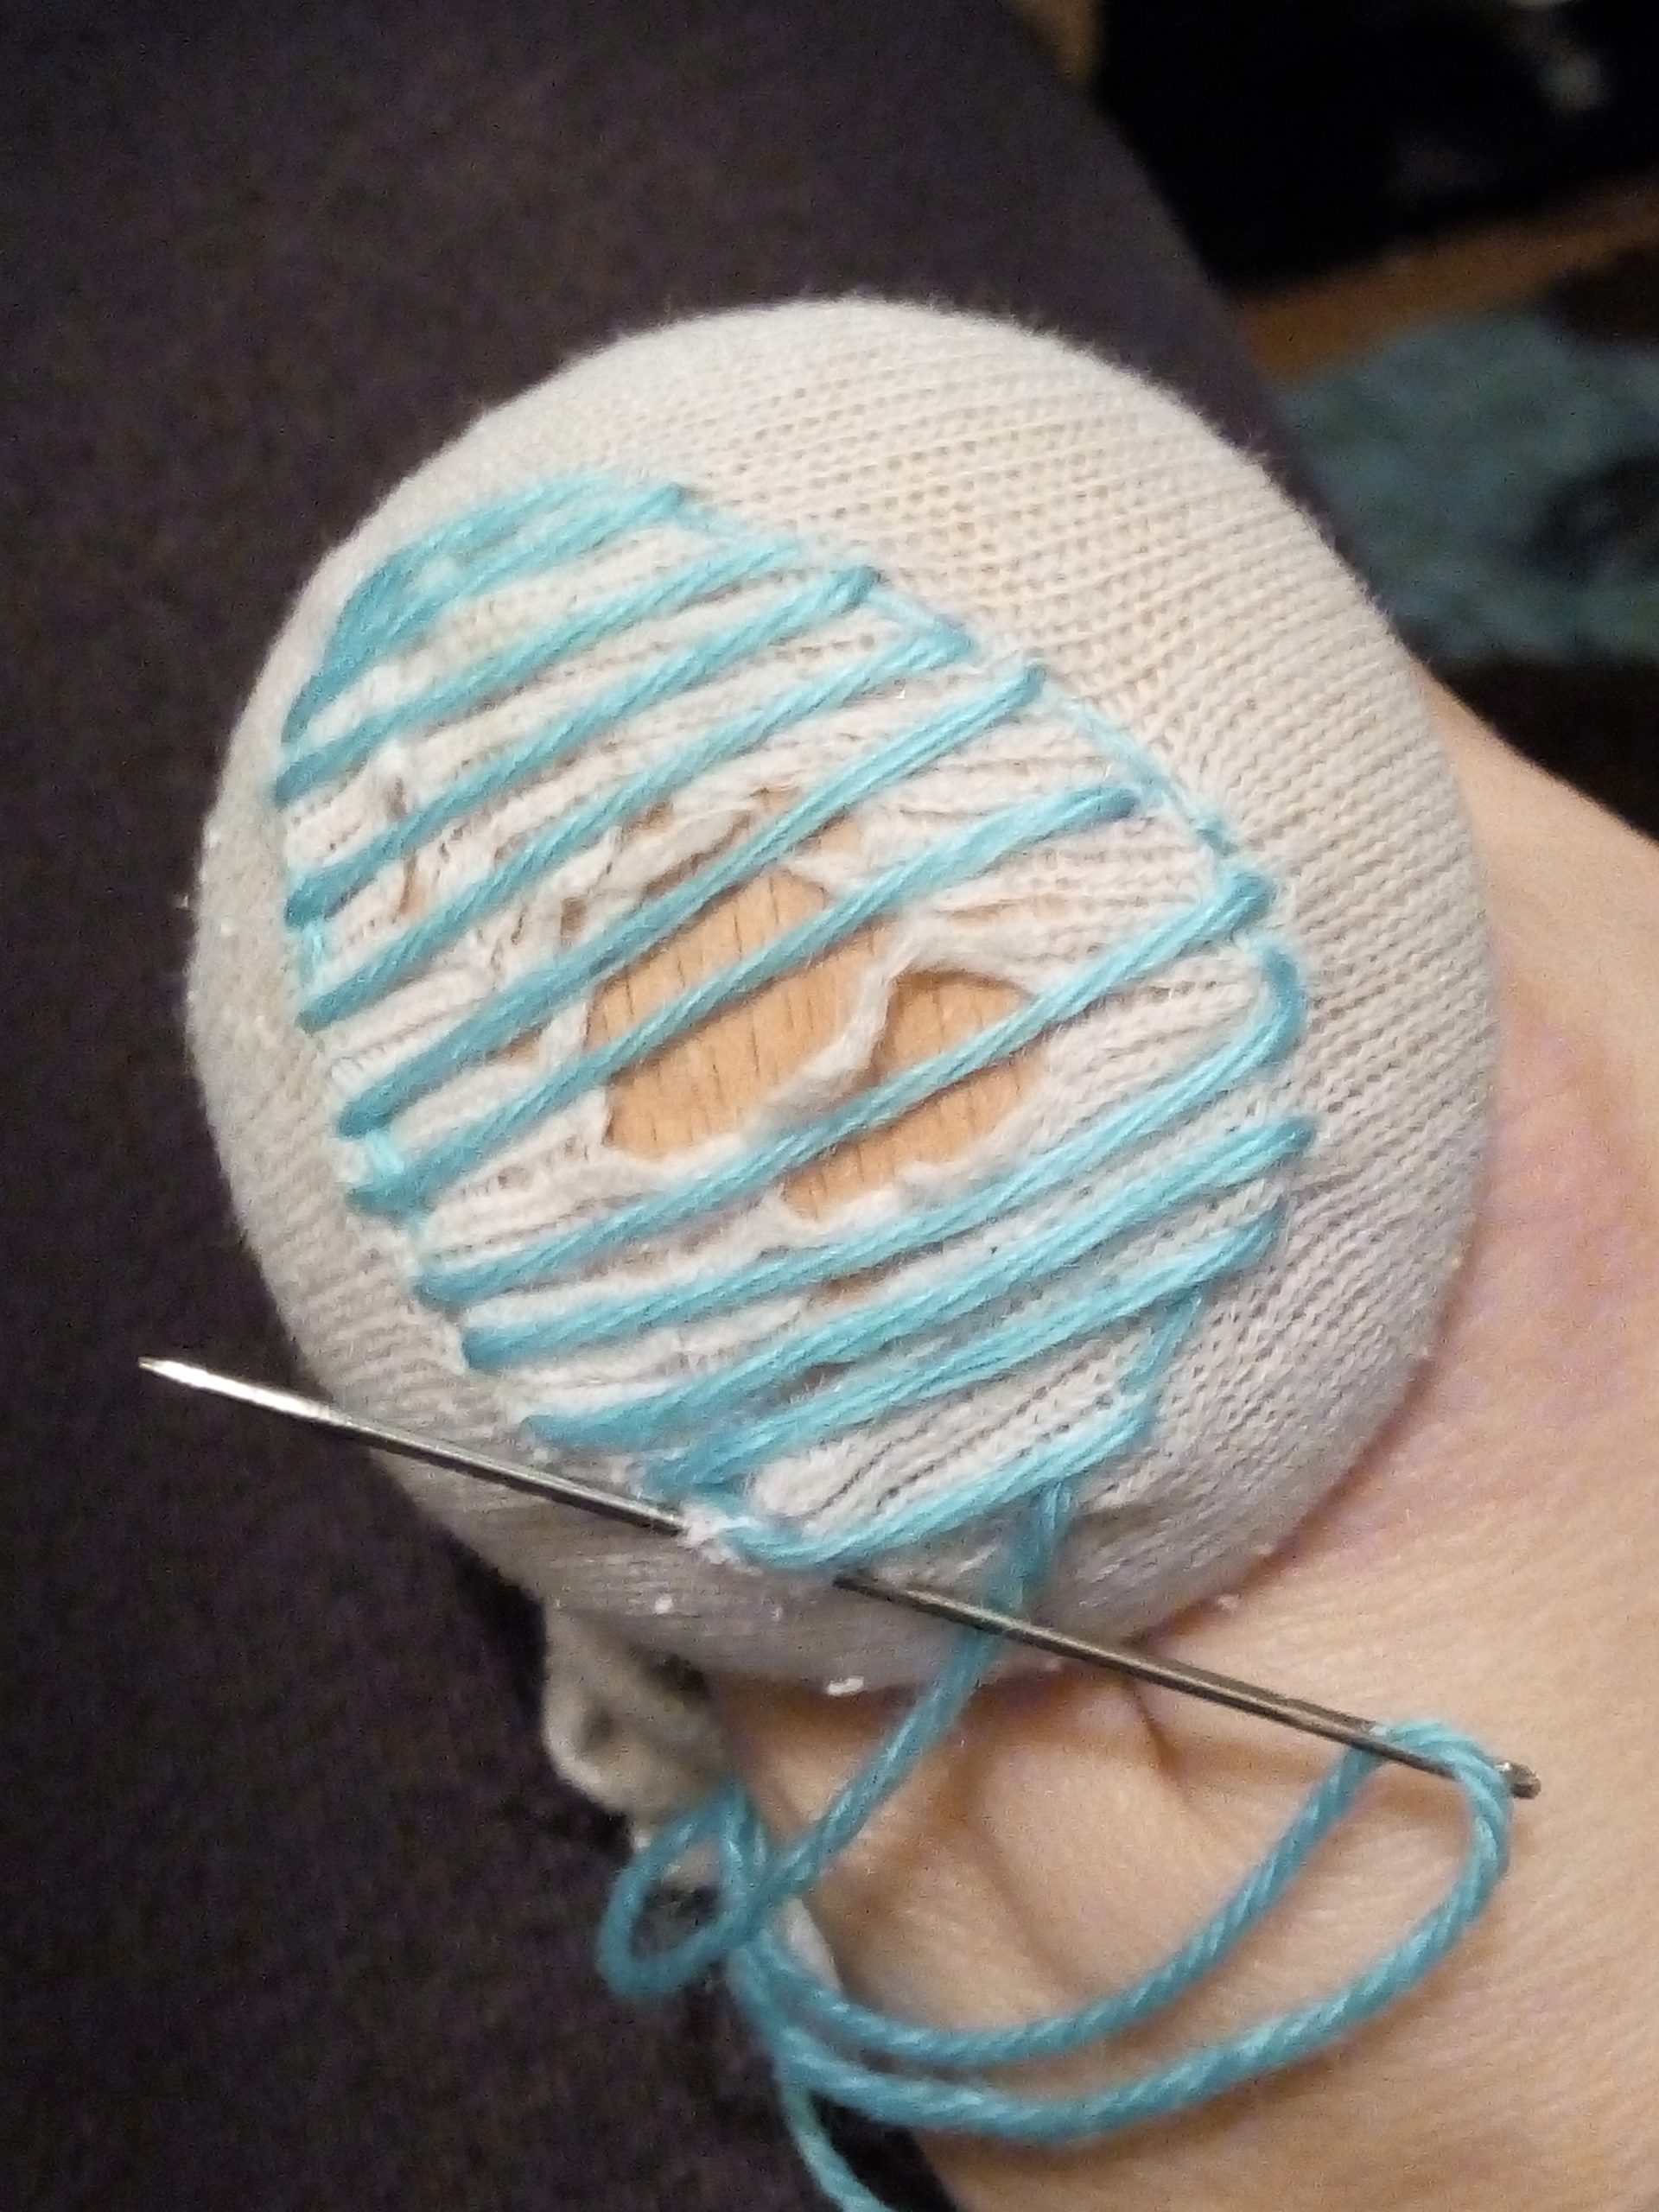 Make Do and Mend: Darning